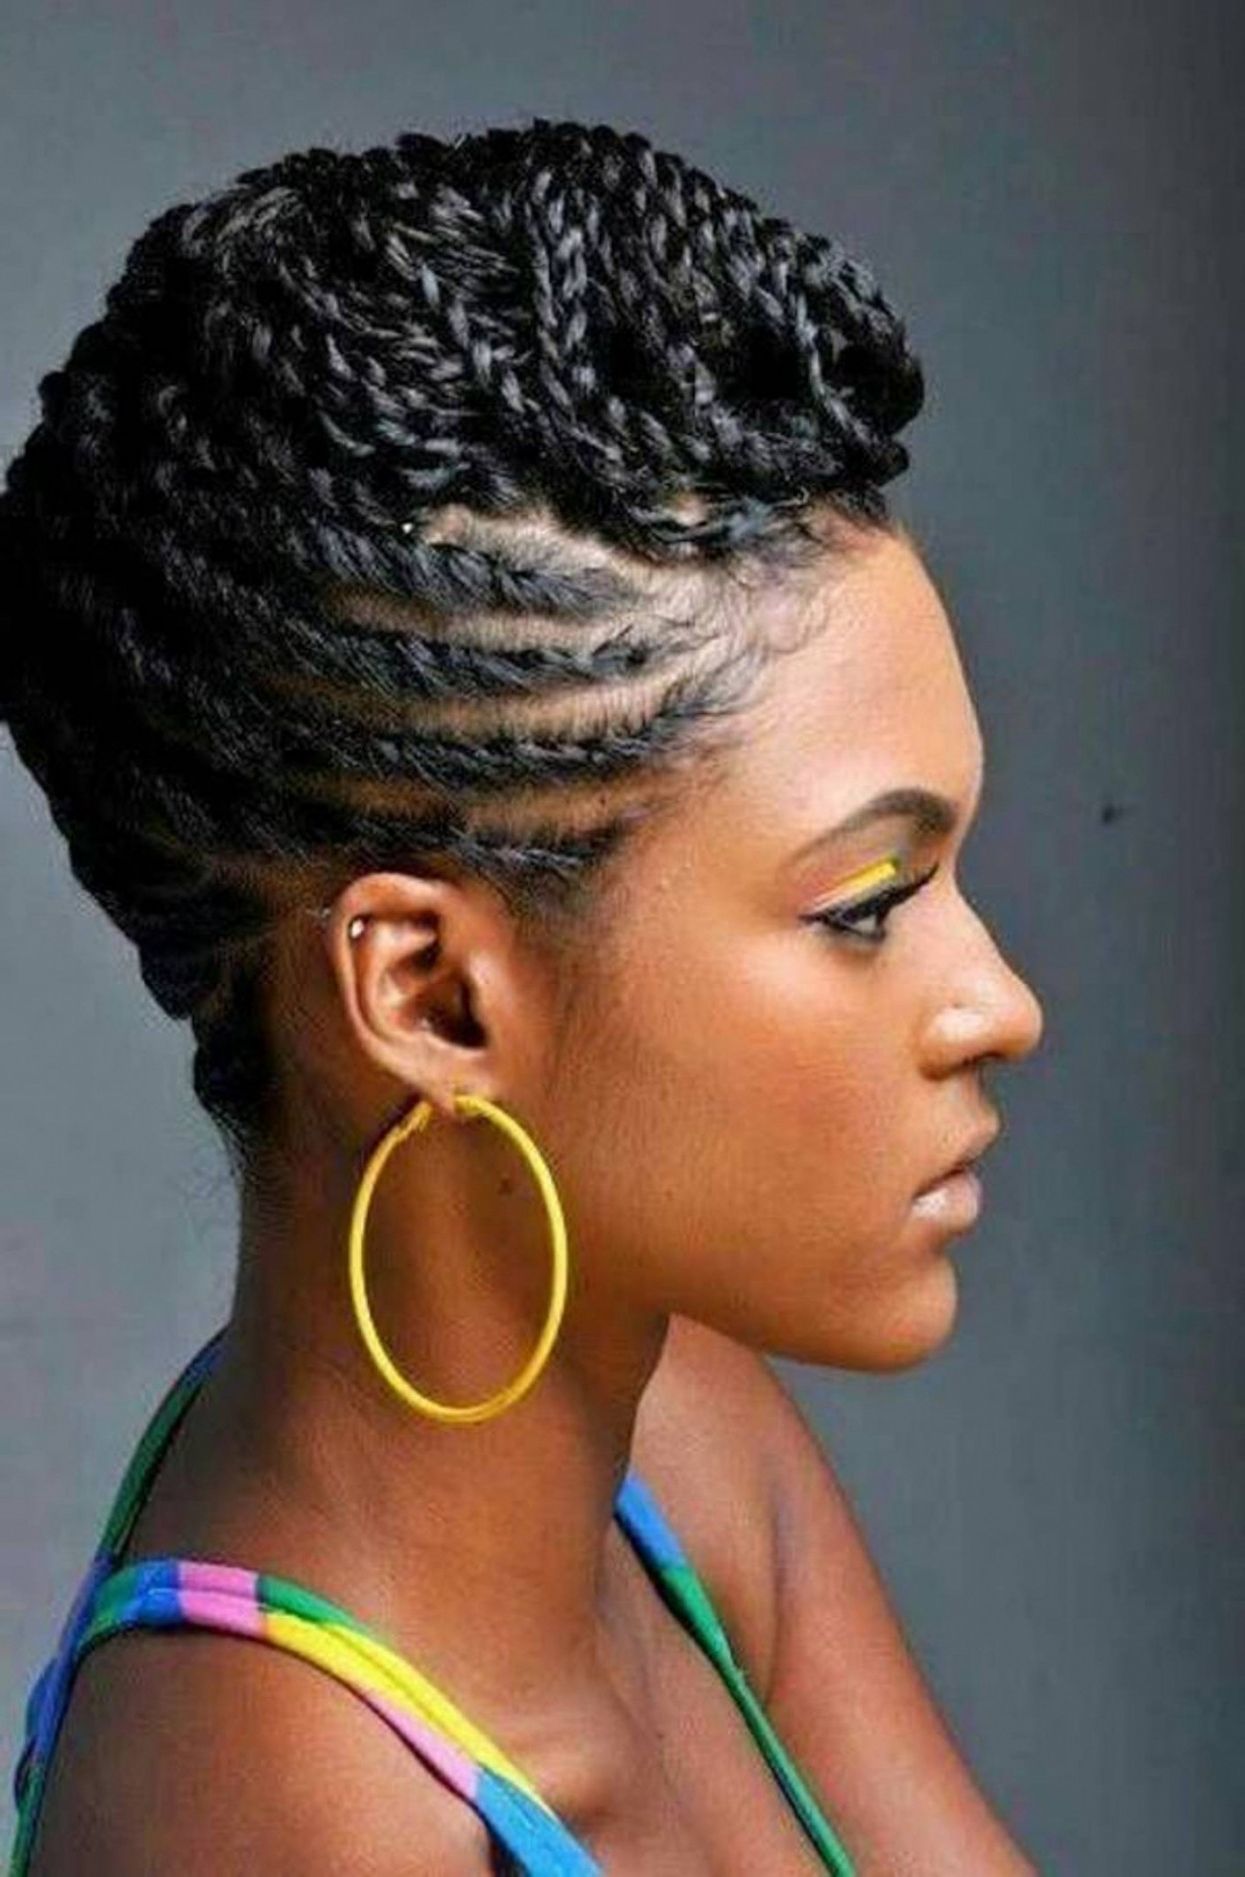 Hairstyles ~ 25 Updo Hairstyles For Black Women Black Natural Pertaining To Black Natural Updo Hairstyles (View 8 of 15)